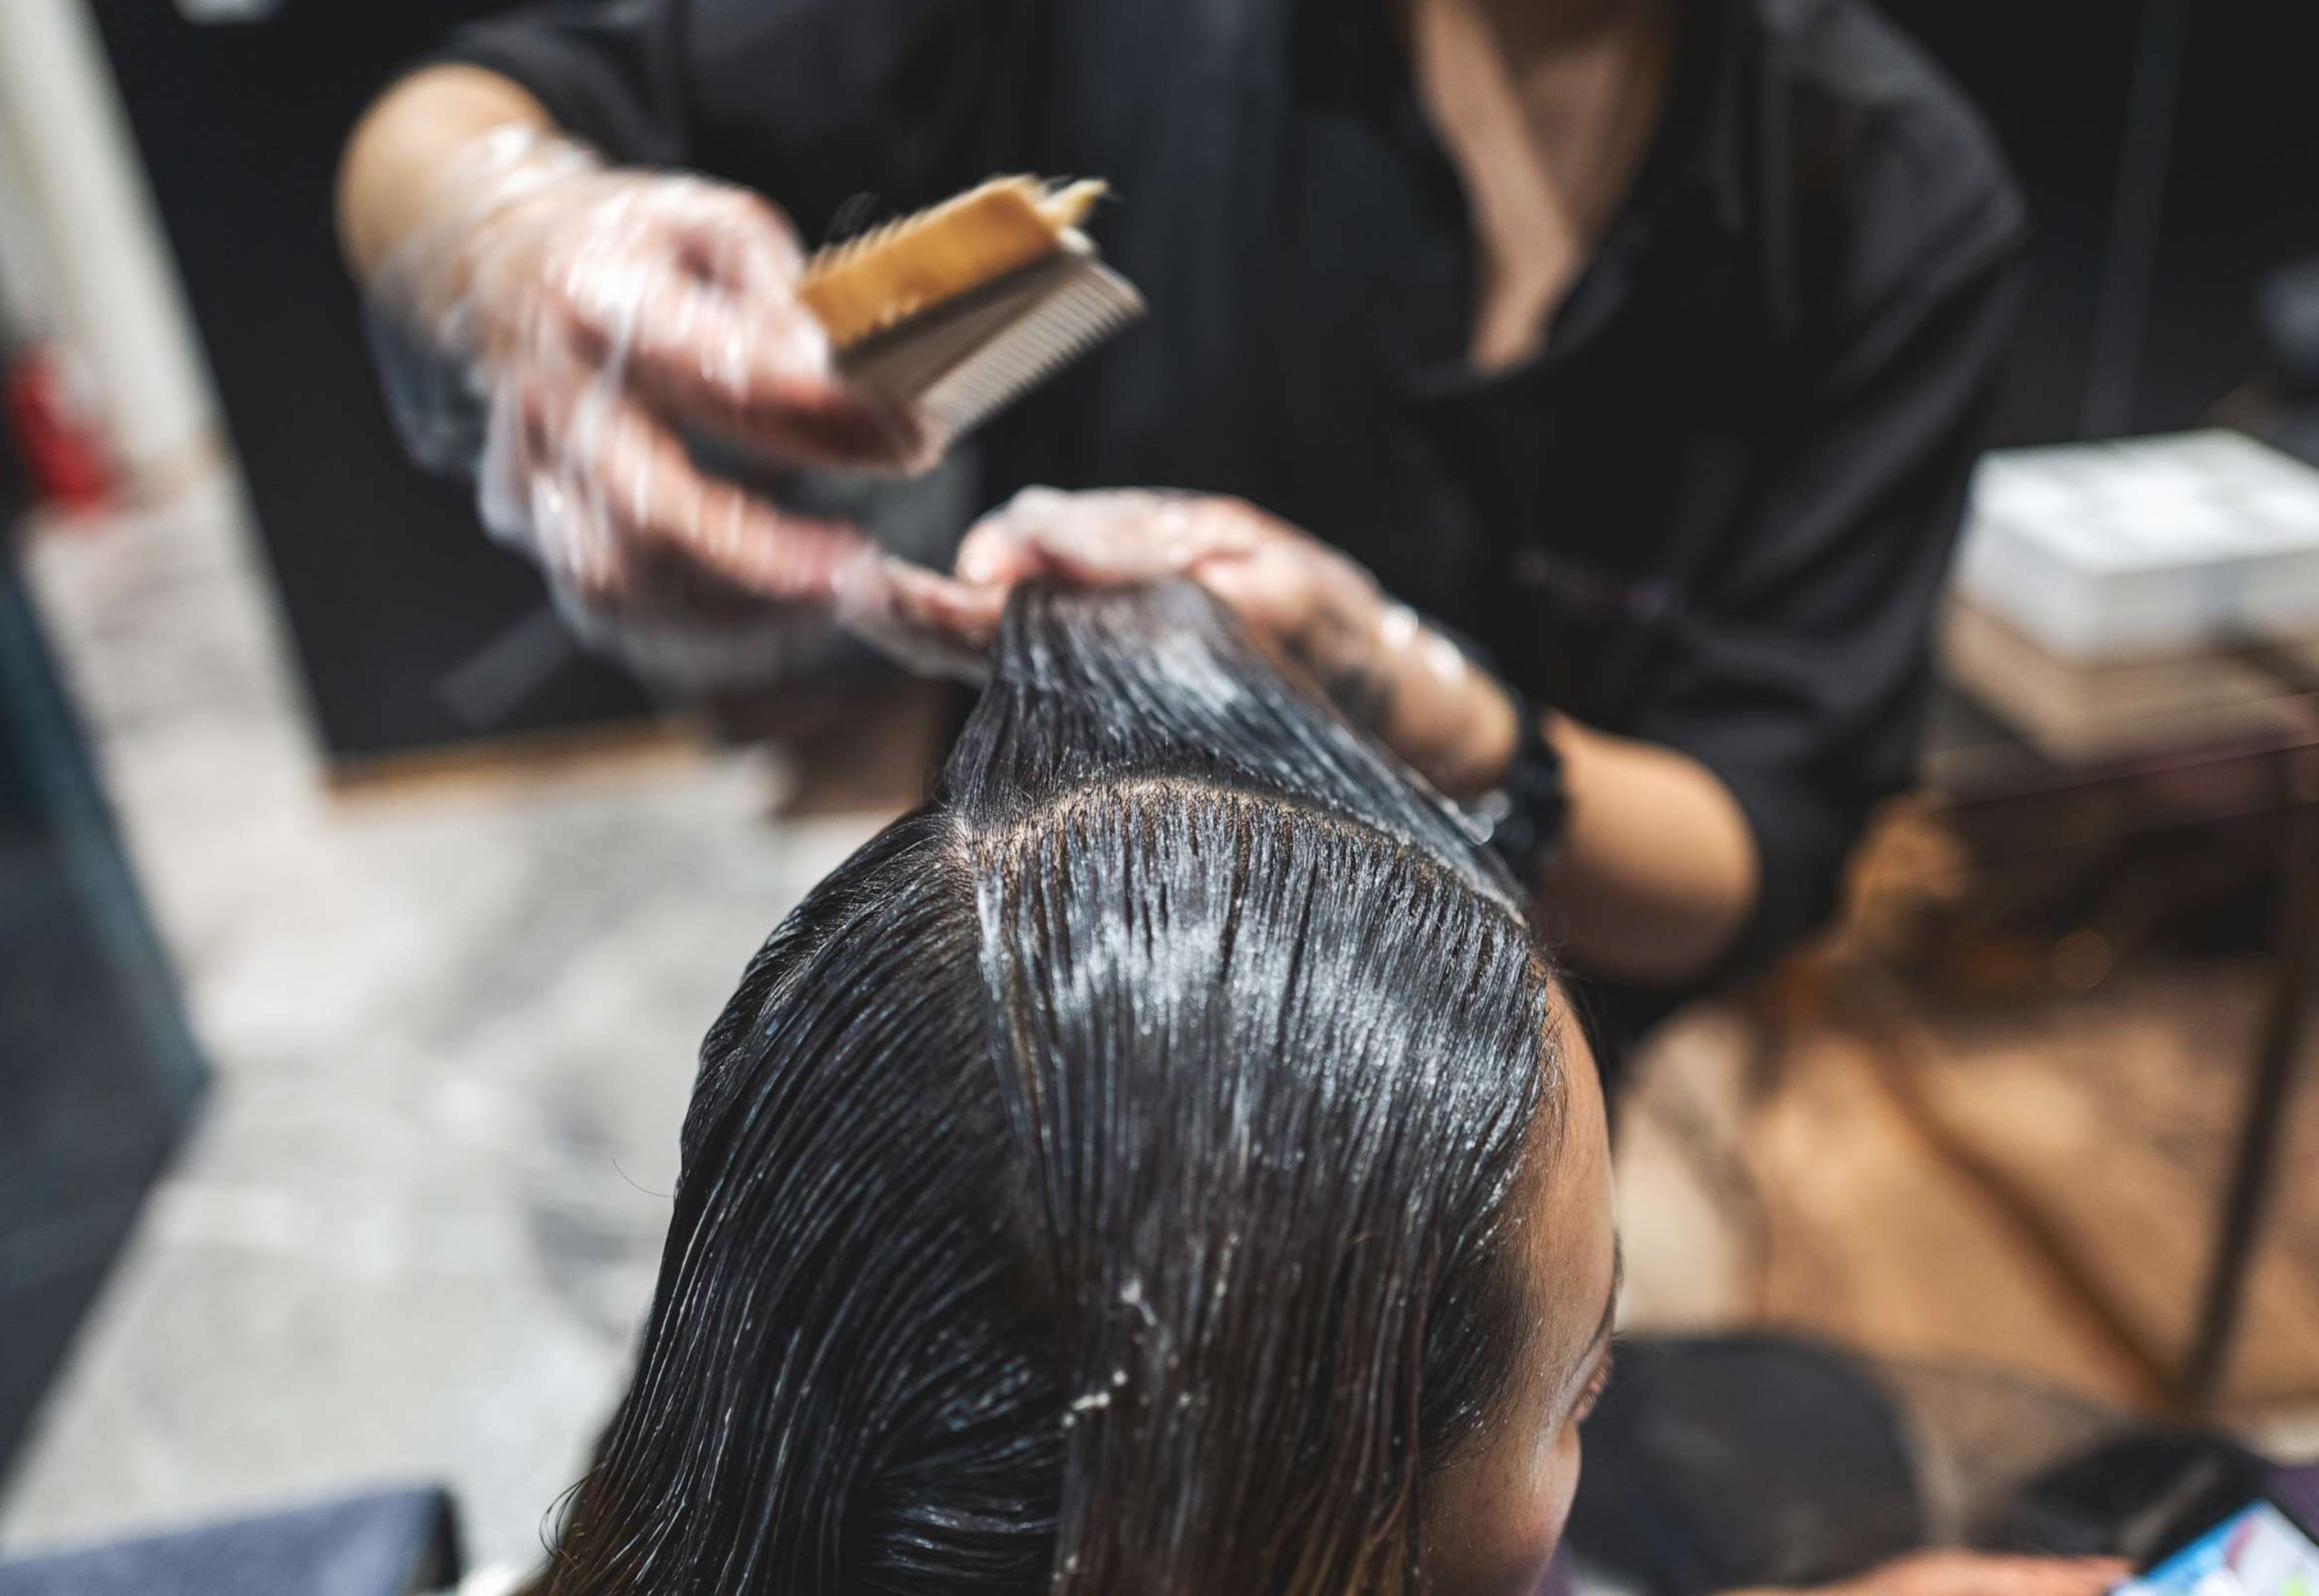 The FDA Contemplates Imposing a Proposed Rule to Prohibit the Use of Formaldehyde in Hair Straightening Products